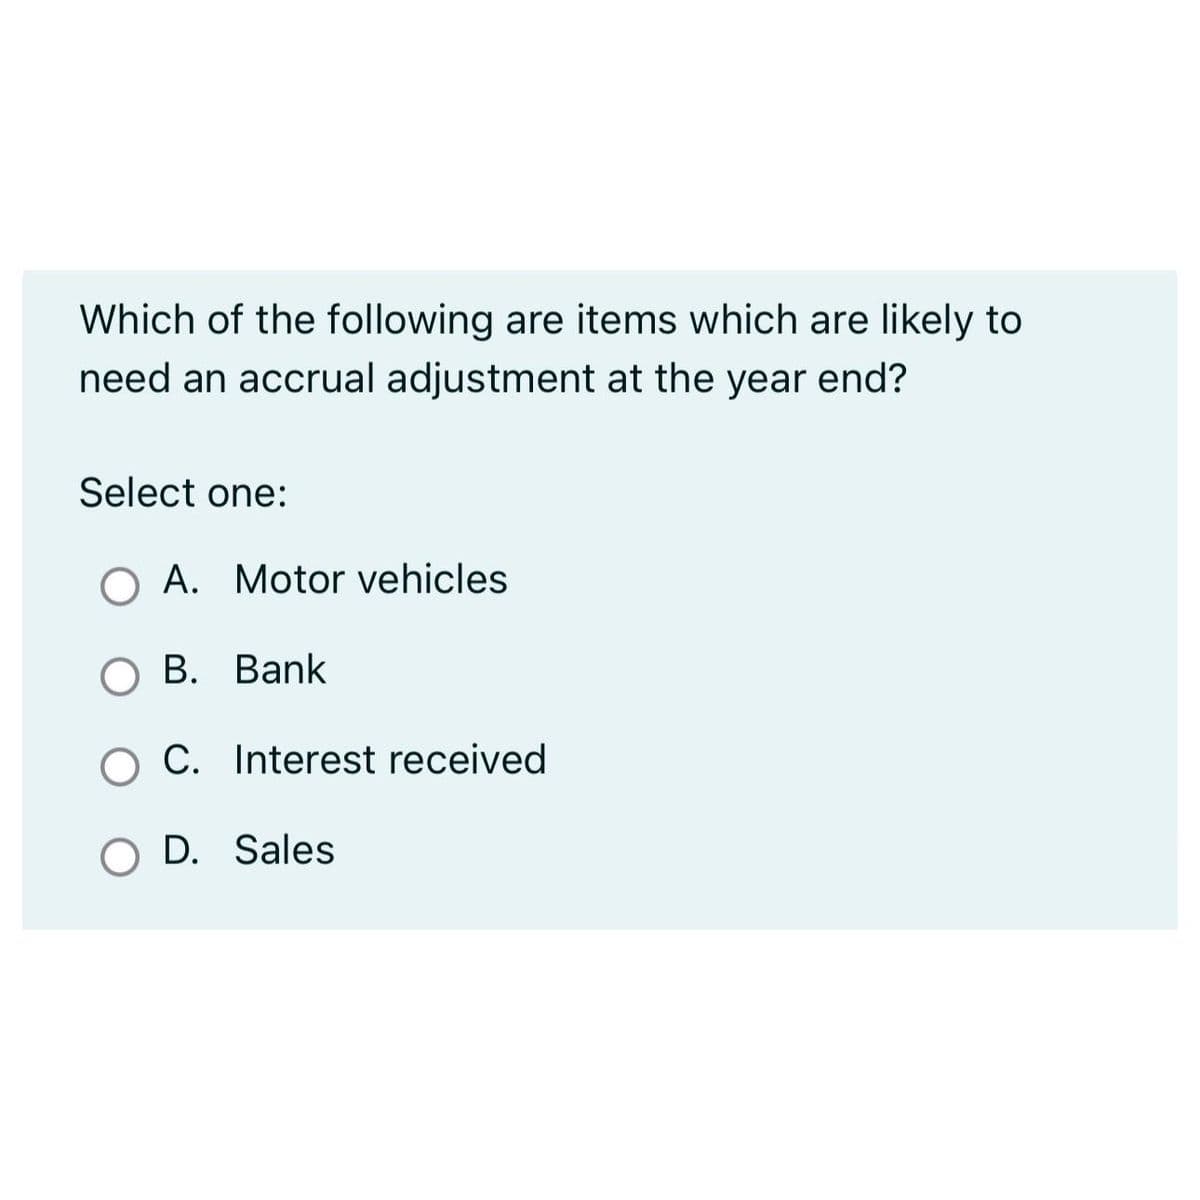 Which of the following are items which are likely to
need an accrual adjustment at the year end?
Select one:
A. Motor vehicles
B. Bank
O C. Interest received
O D. Sales